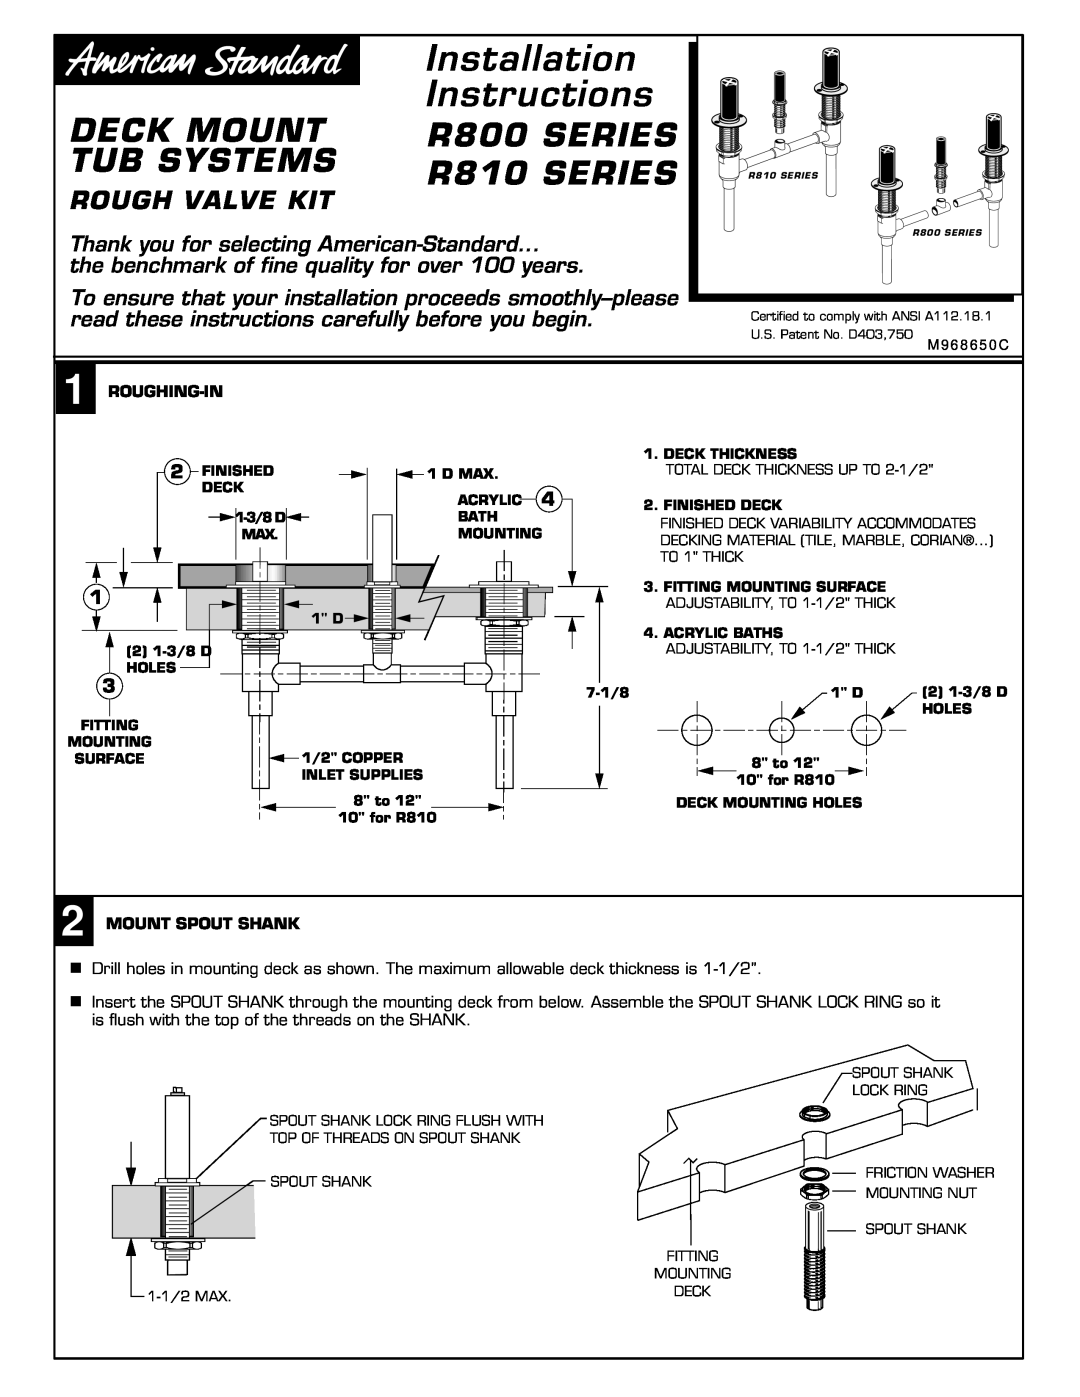 American Standard M968757D R800 SERIES, Tub Systems, R810 SERIES, Rough Valve Kit, Installation, Instructions, Deck Mount 